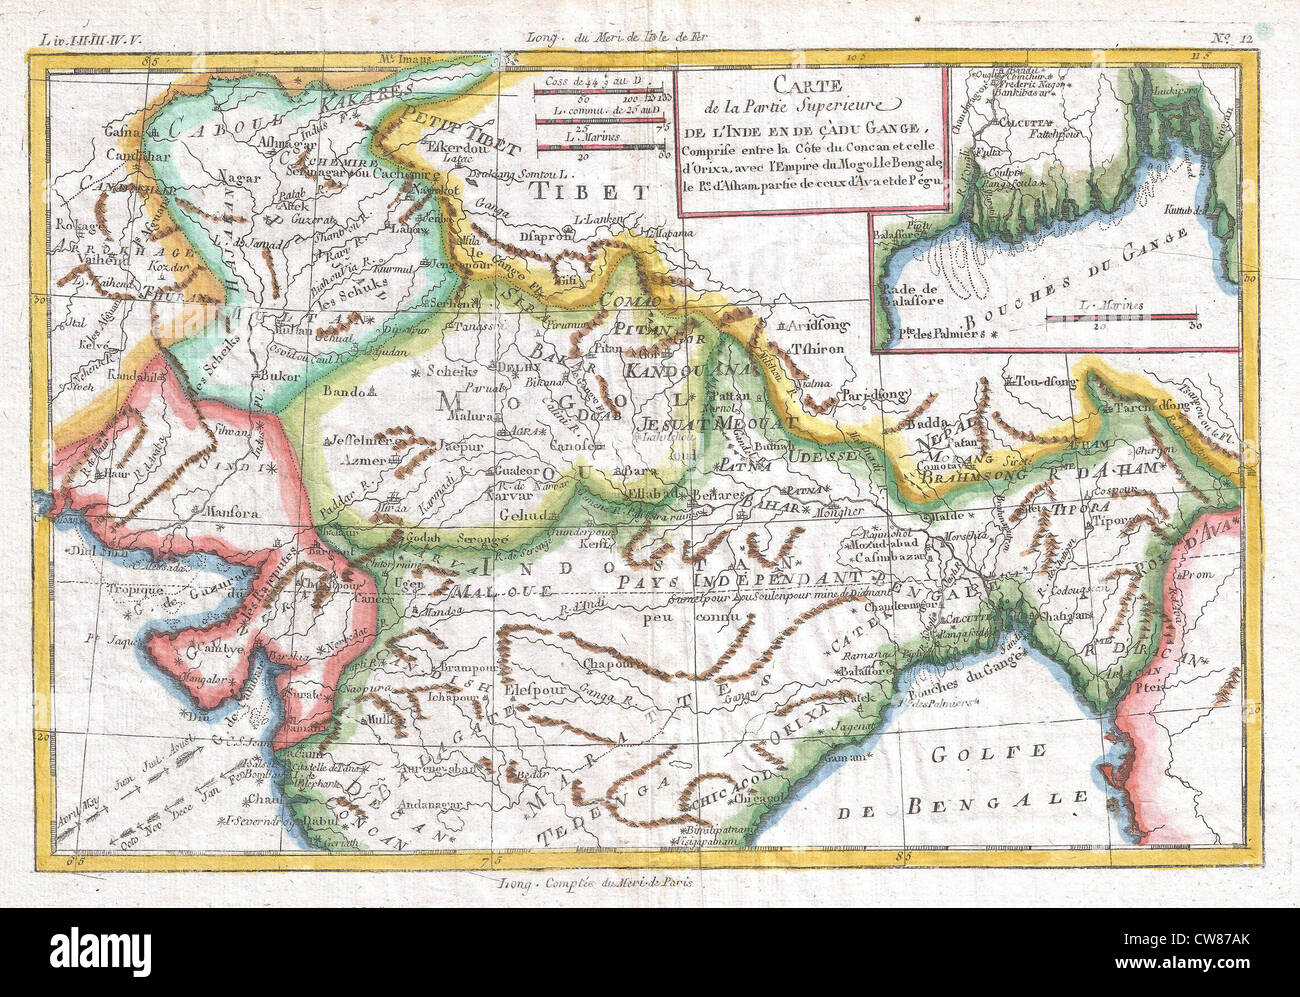 1780 Raynal and Bonne Map of Northern India Stock Photo